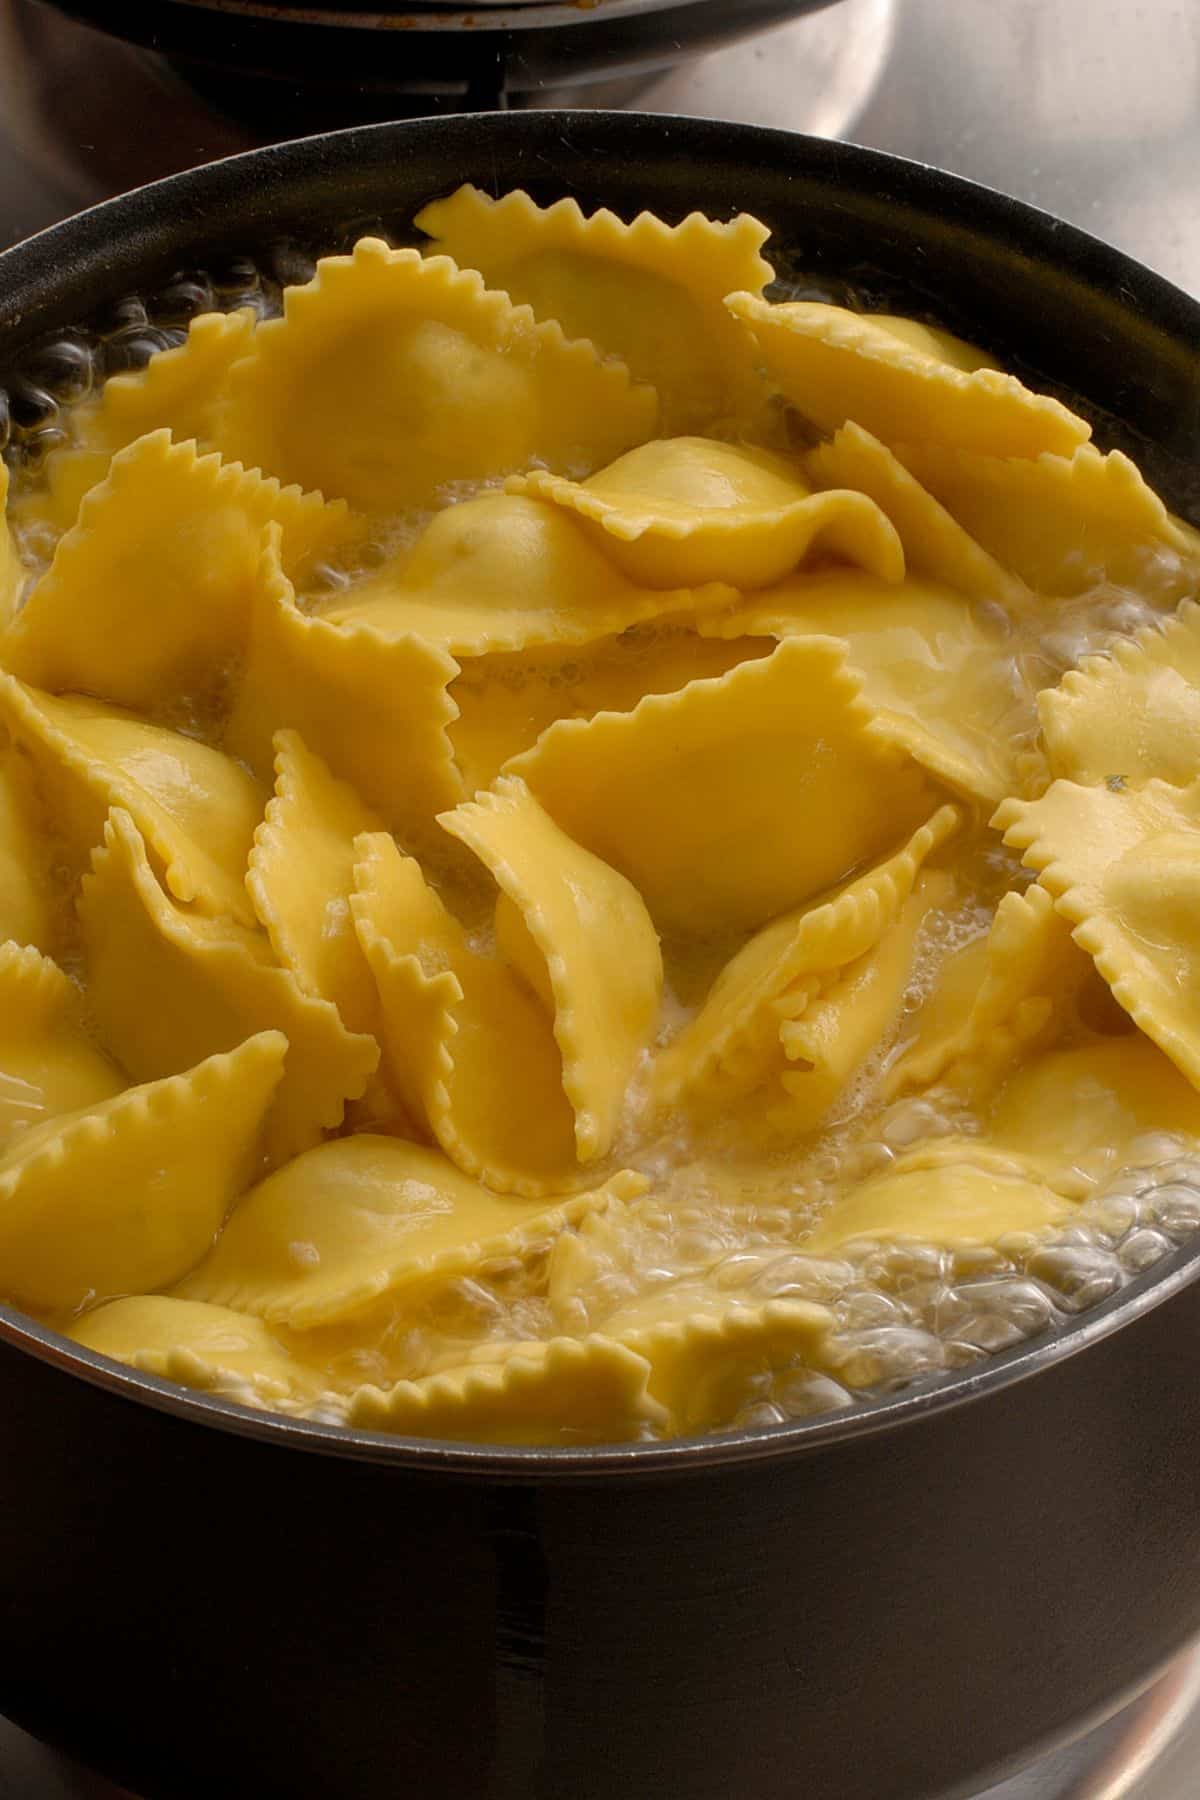 Ravioli coming to the surface in a pot of boiling water. 